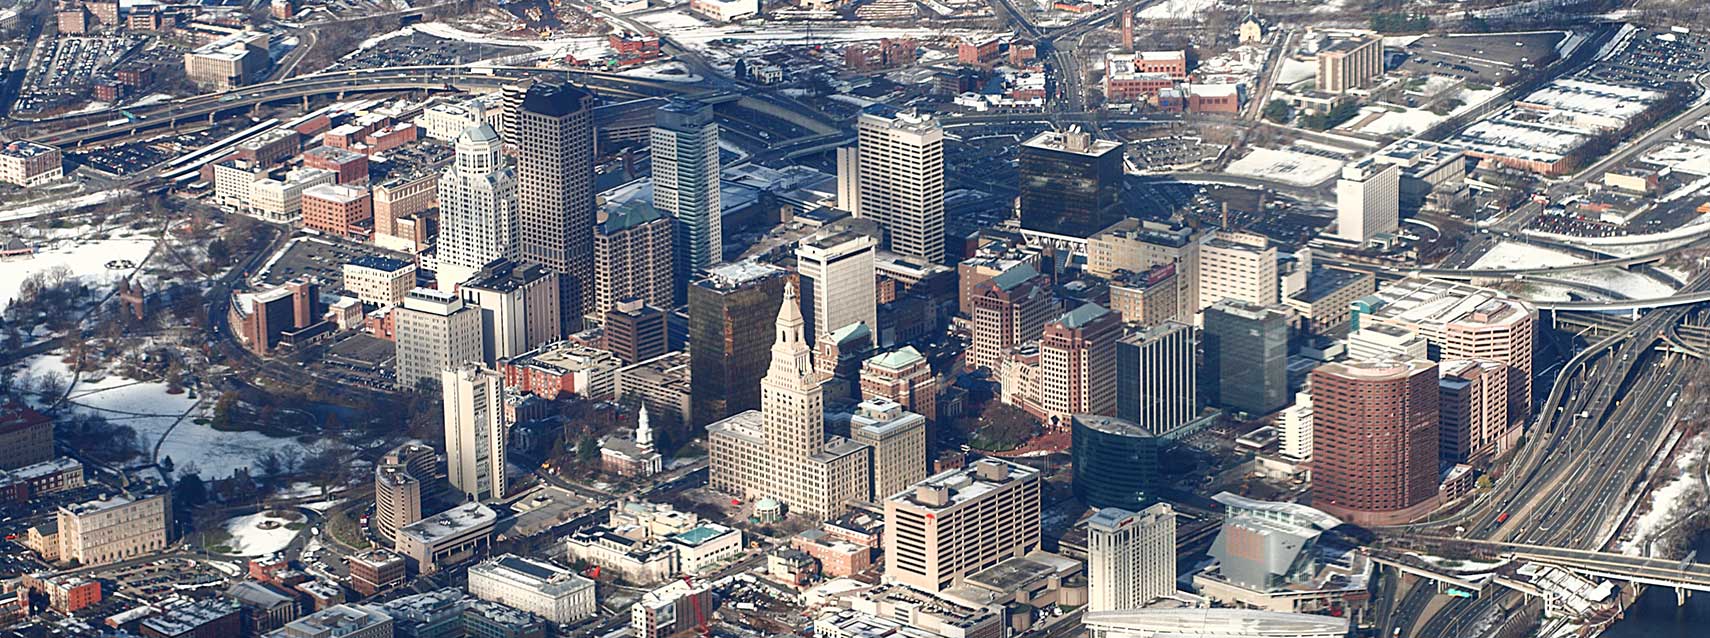 Downtown Hartford from the air